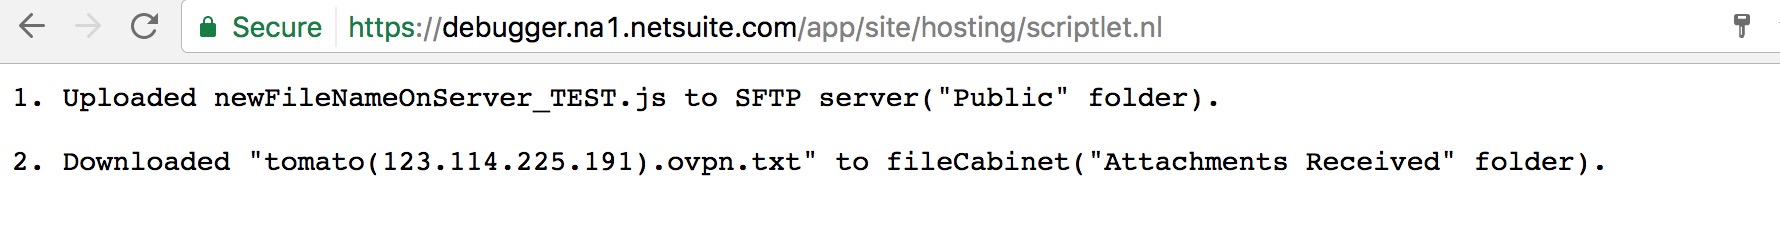 Upload/Sent specific NS File Cabinet file to SFTP server. Response